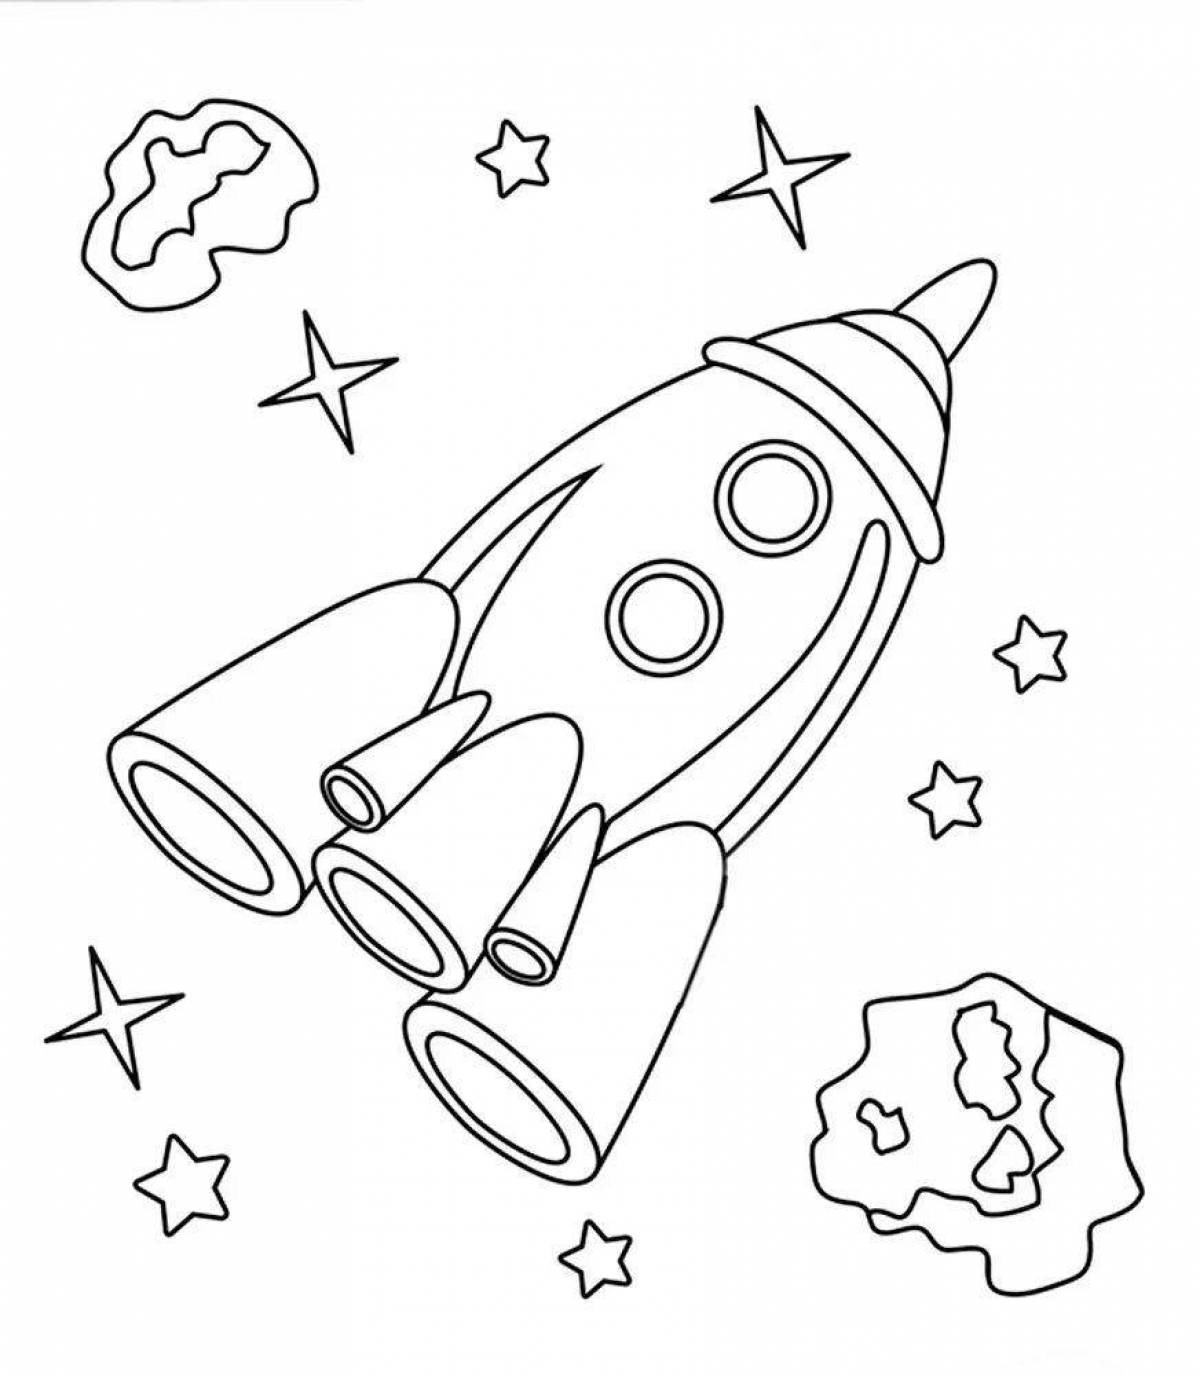 Color dynamic rocket coloring book for 4-5 year olds